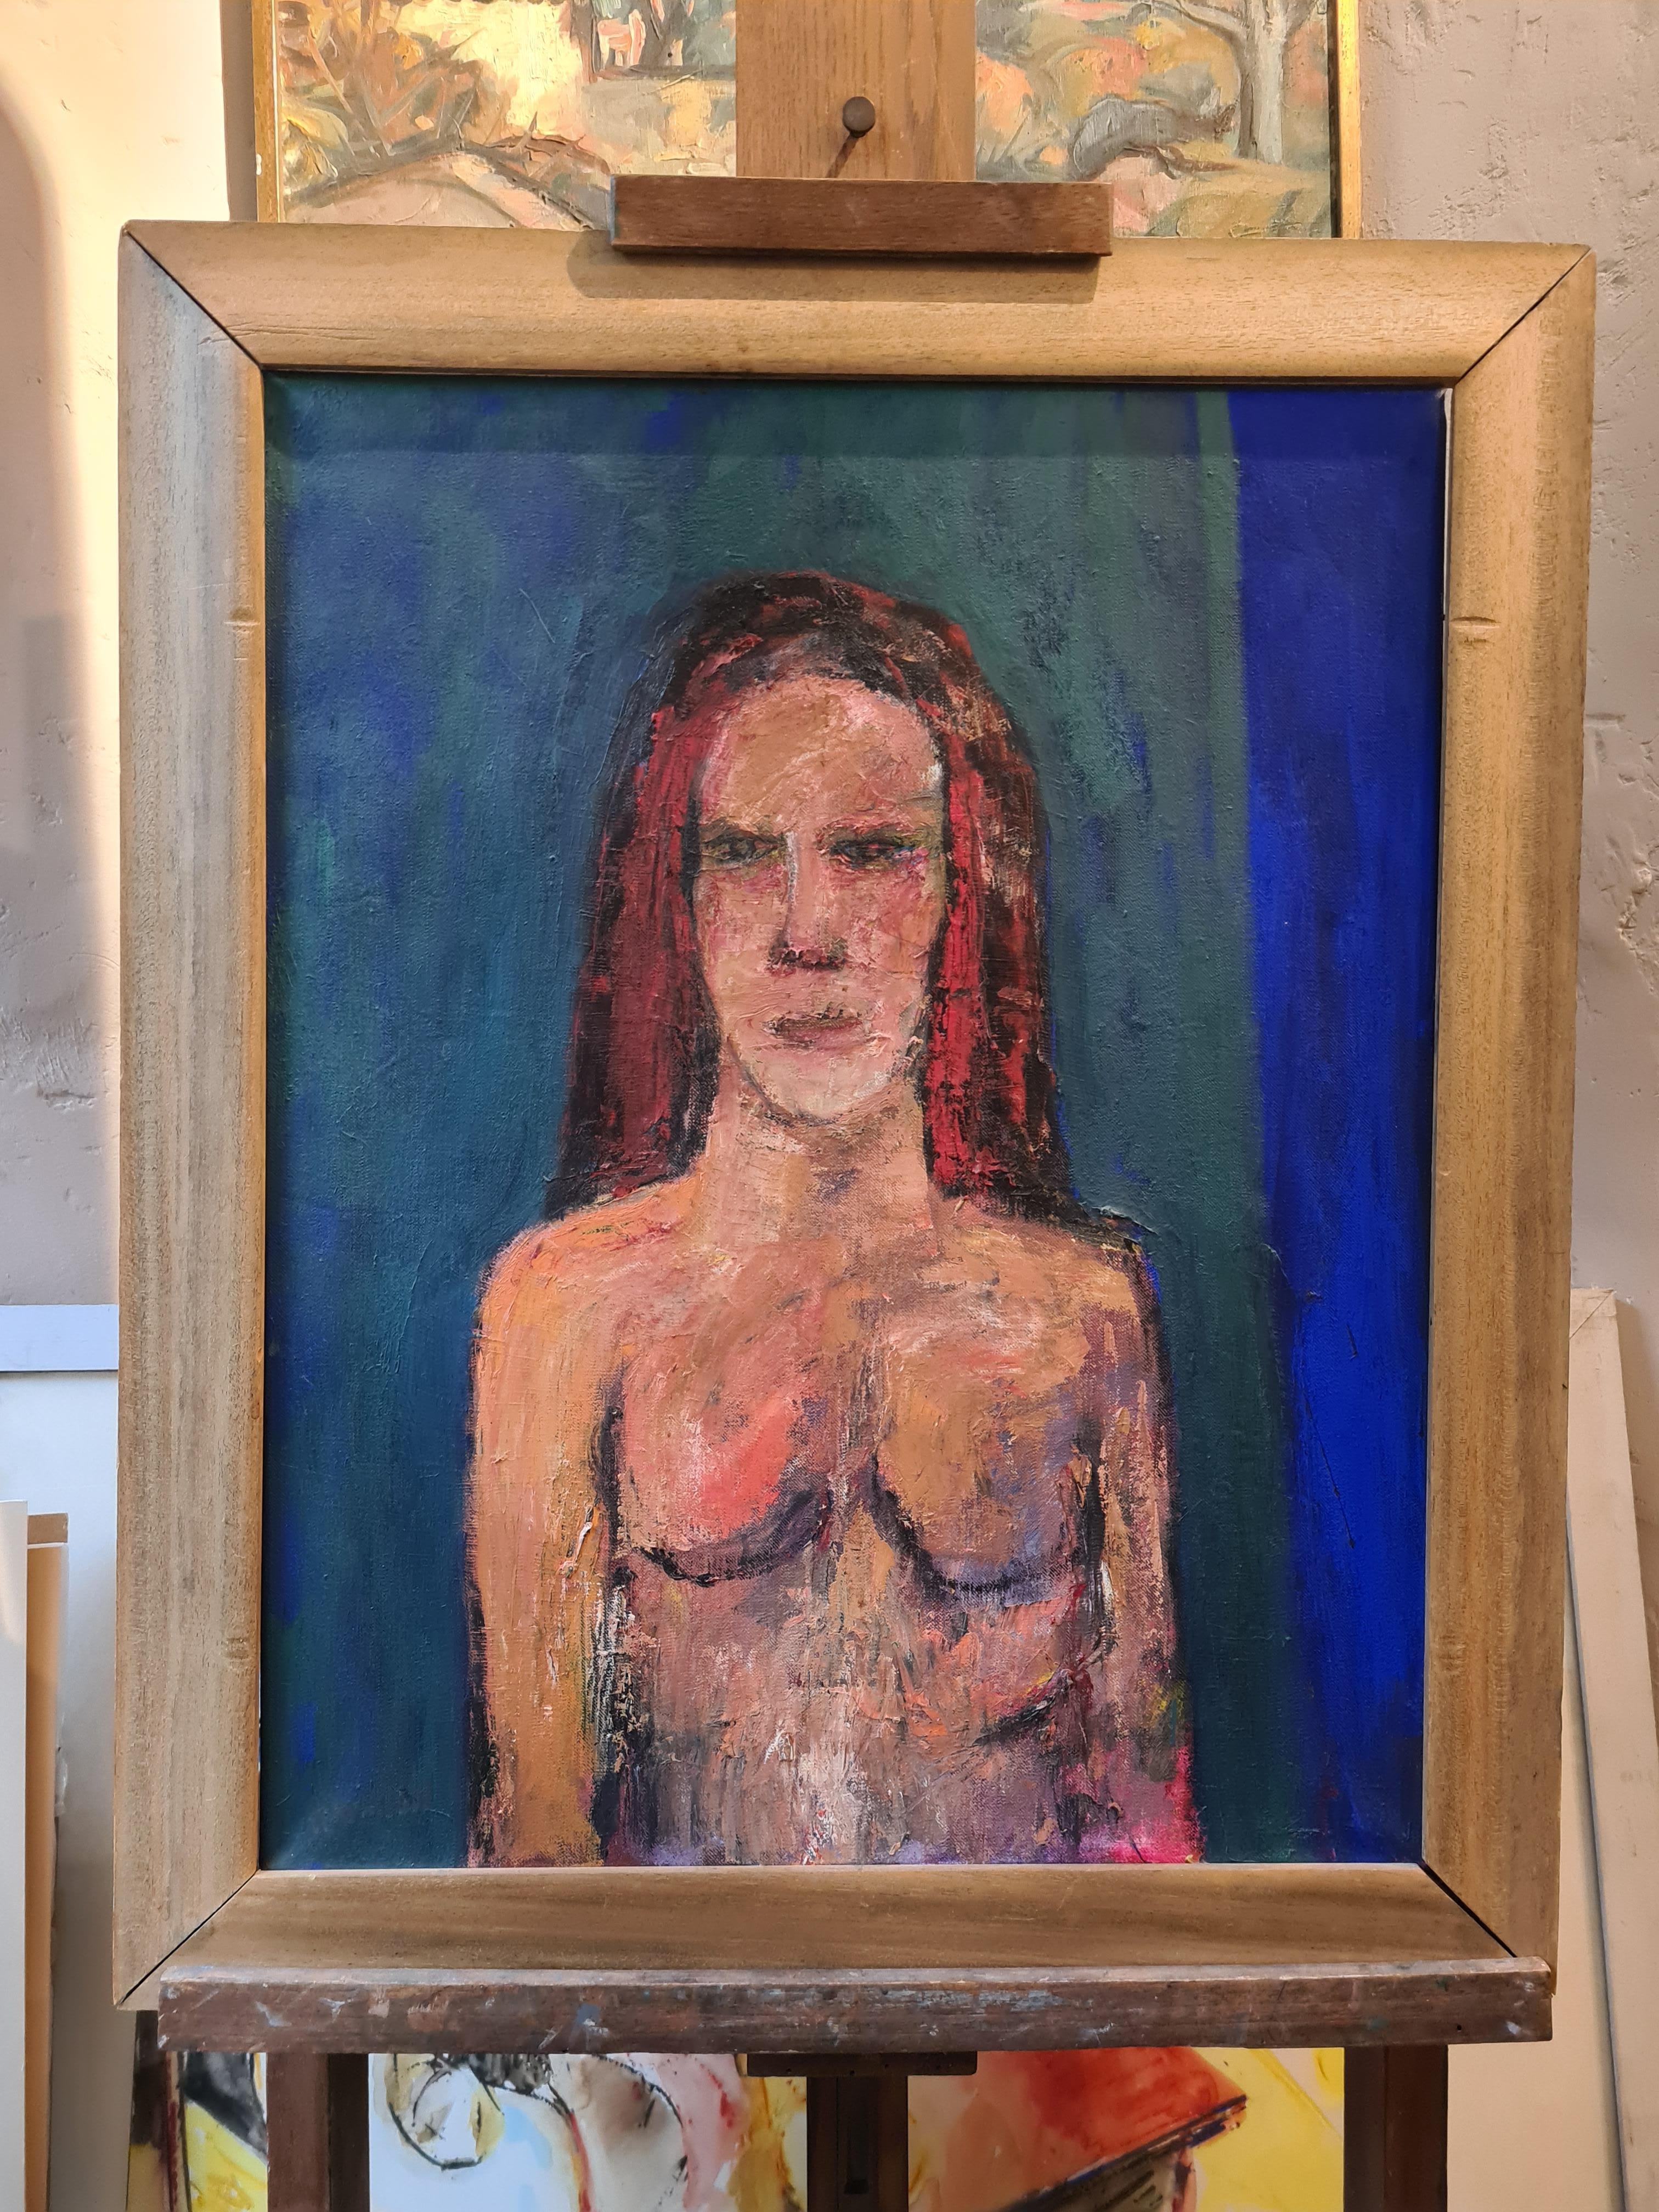 Expressionist Female Nude Portrait, 'The Green Curtain' Oil on Canvas. - Painting by Douglas Thomson